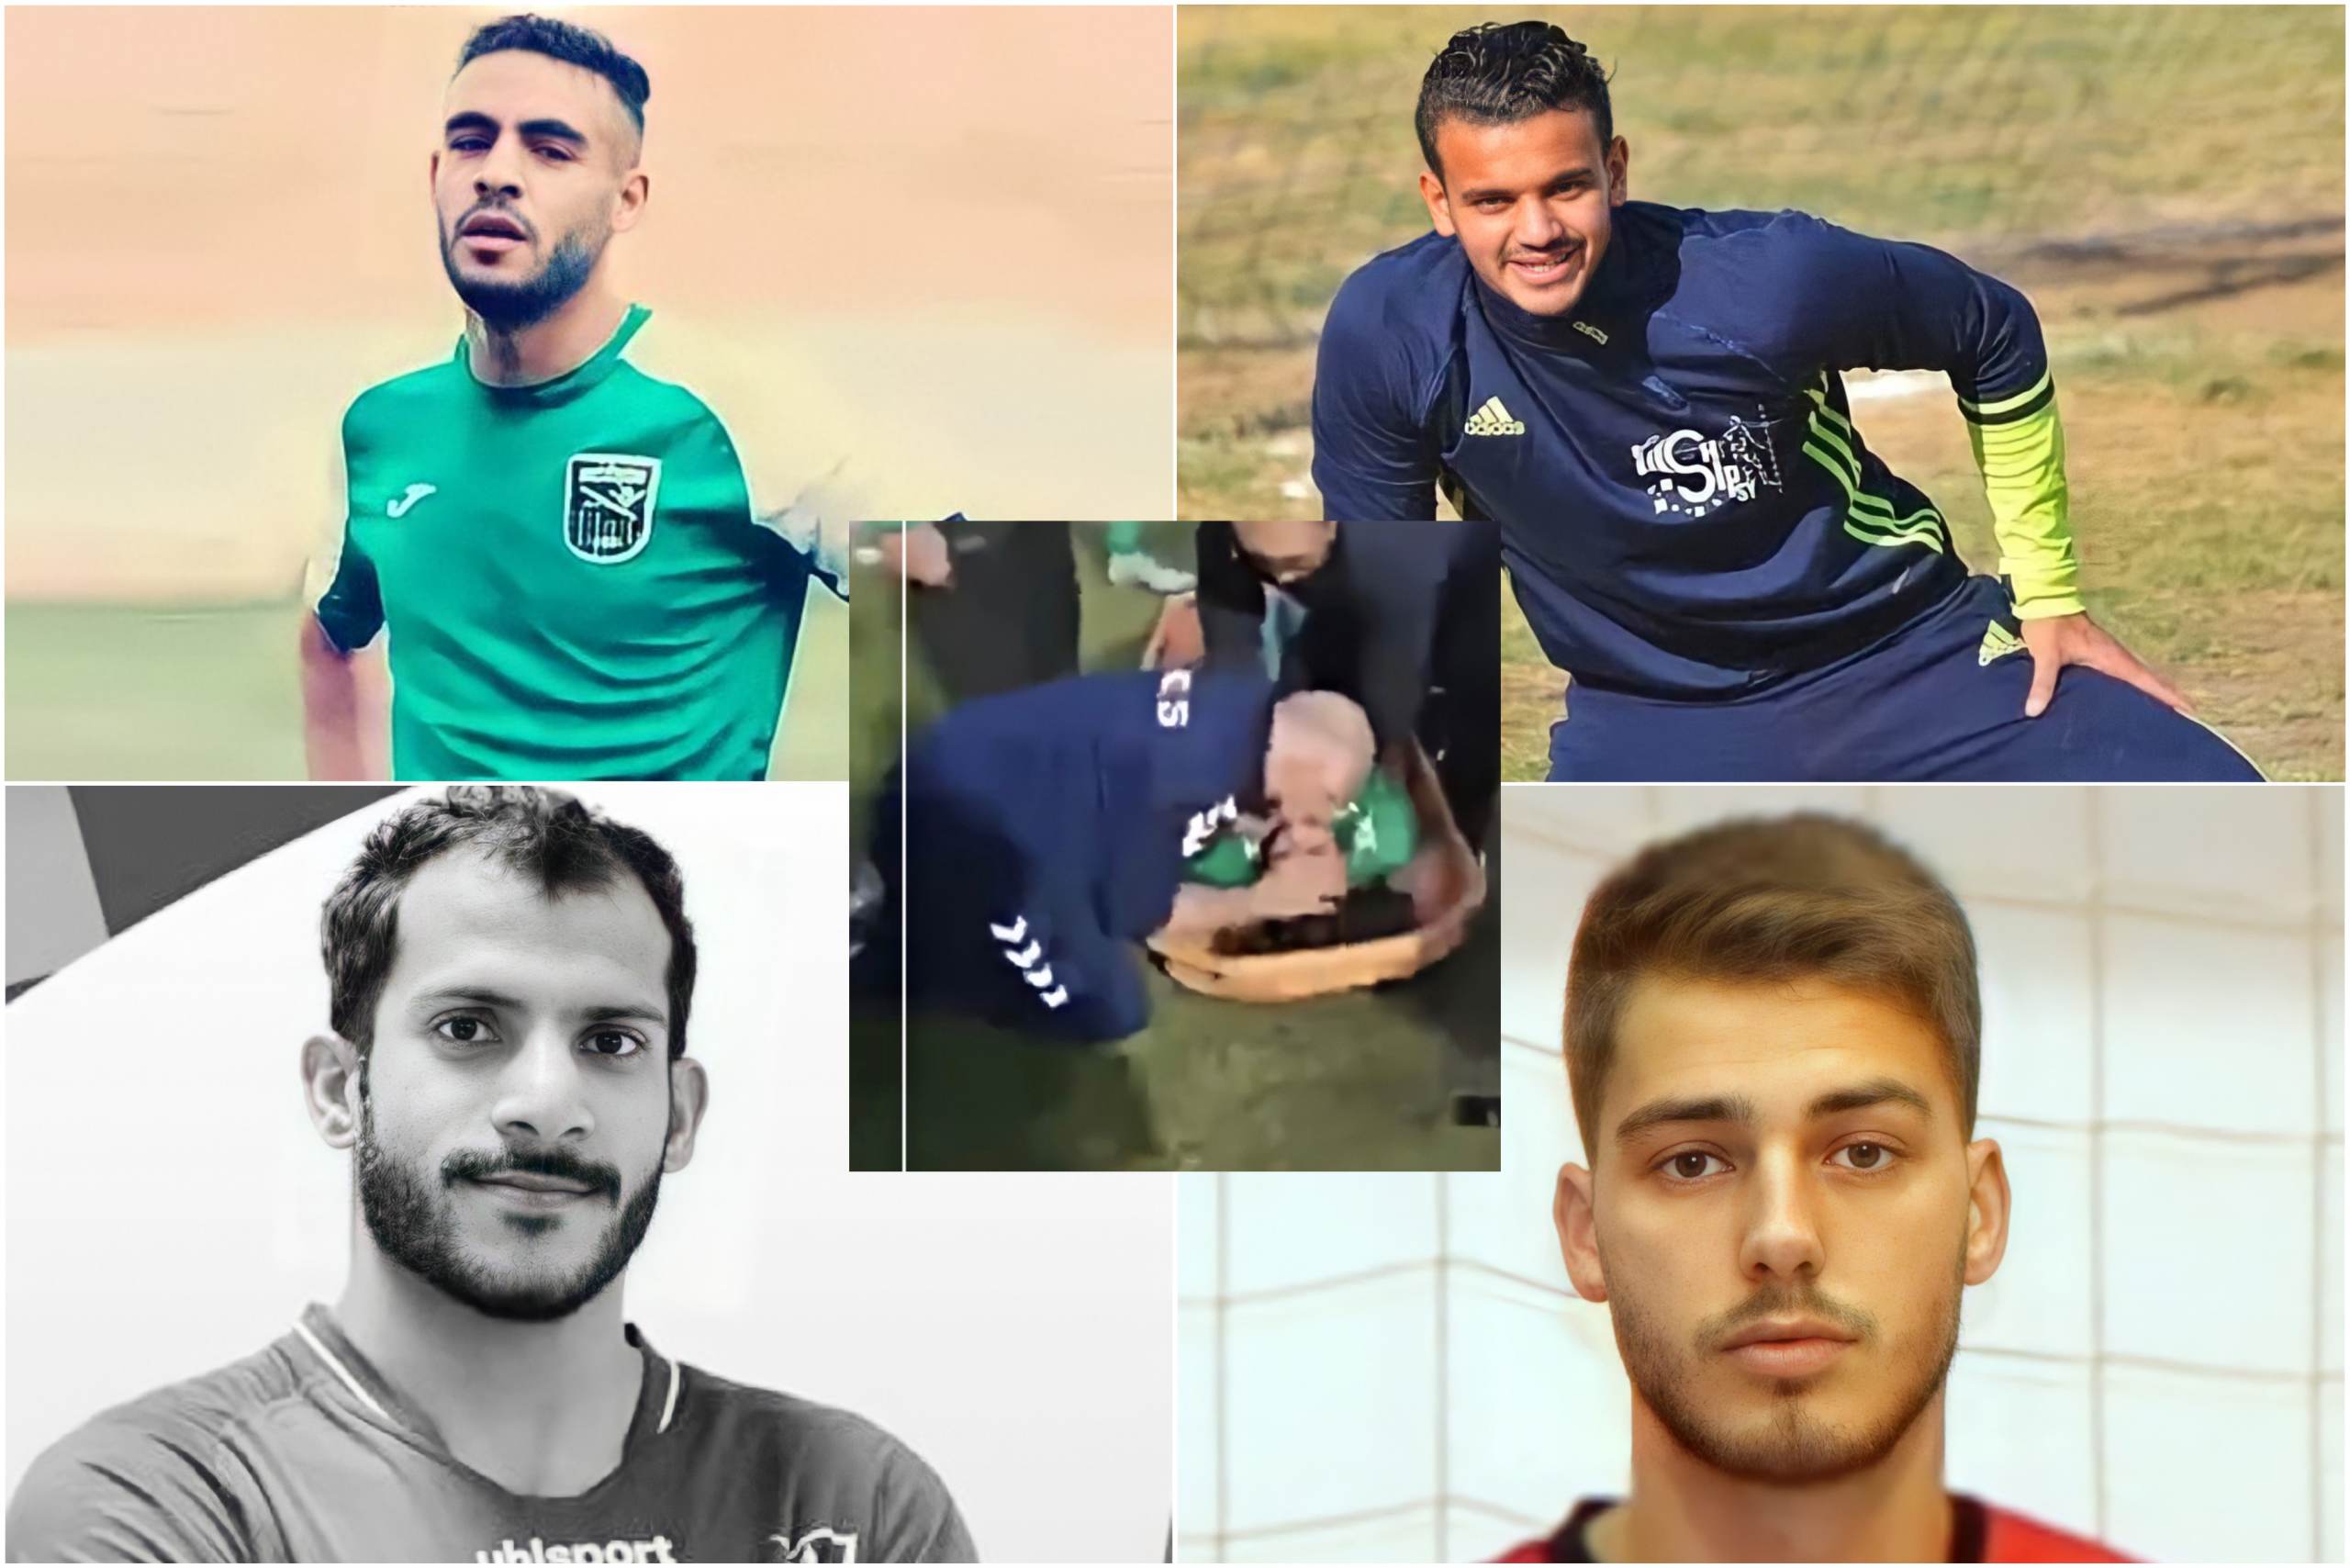 HORROR: Four Young Soccer Stars from Four Different Countries Die This Week After Suffering Sudden Heart Attacks